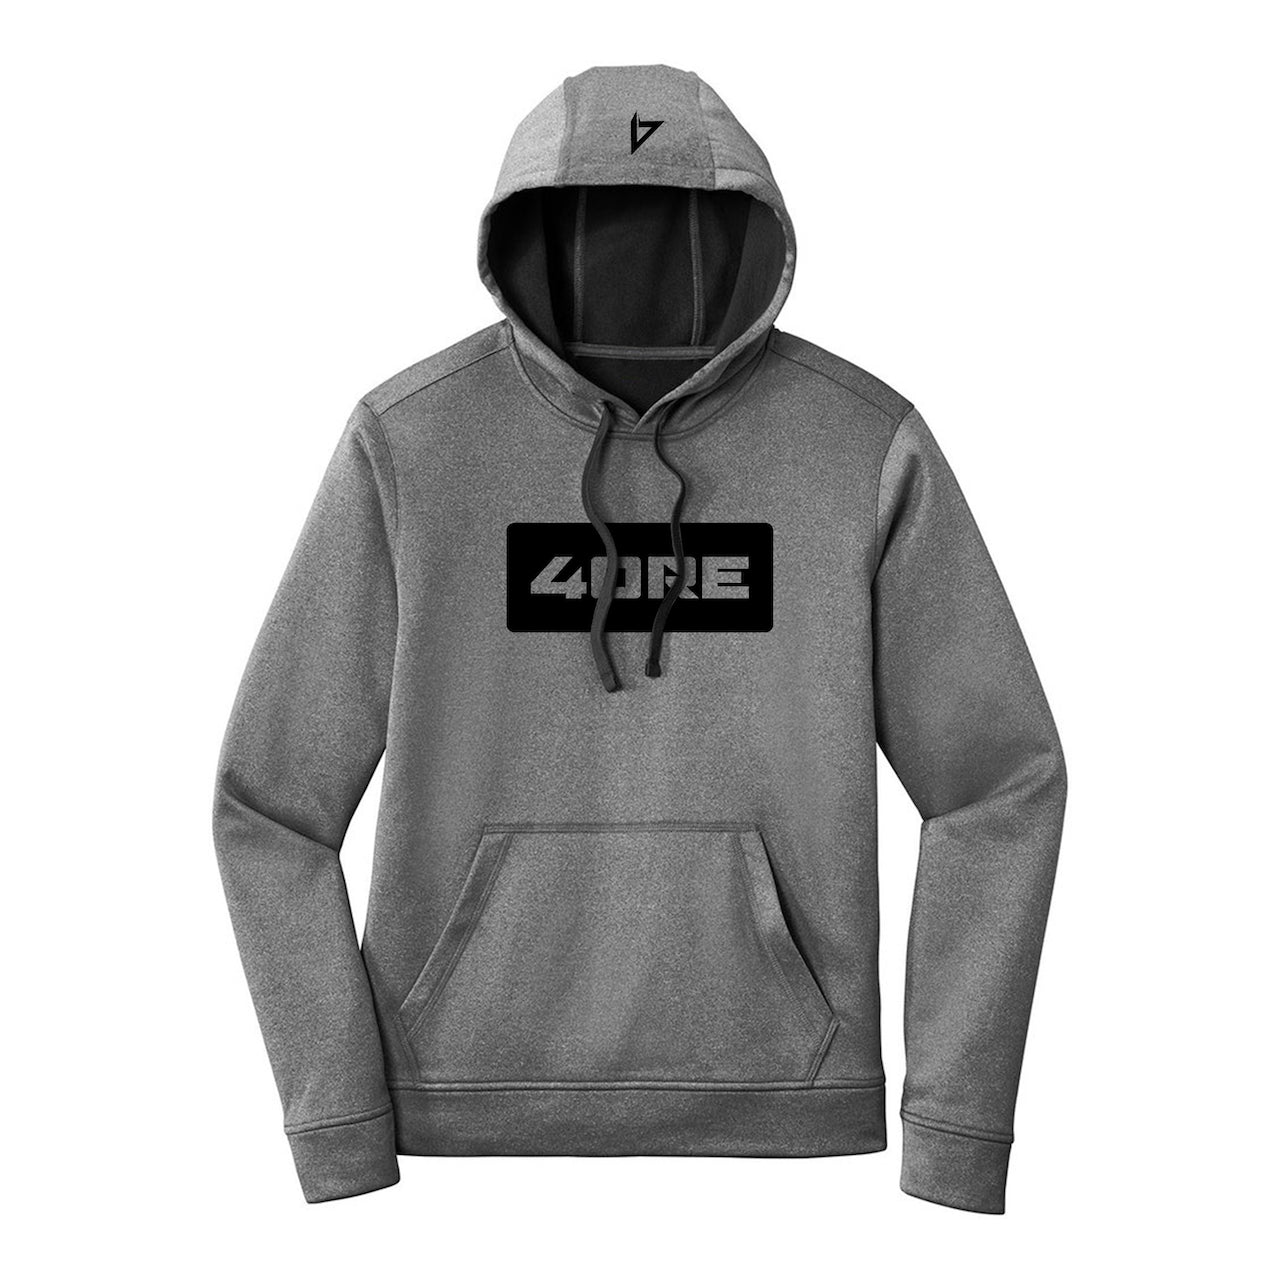 4ORE TOUR HOODIE LIMITED EDITION – NUTRITION [GRAY] 4ORE